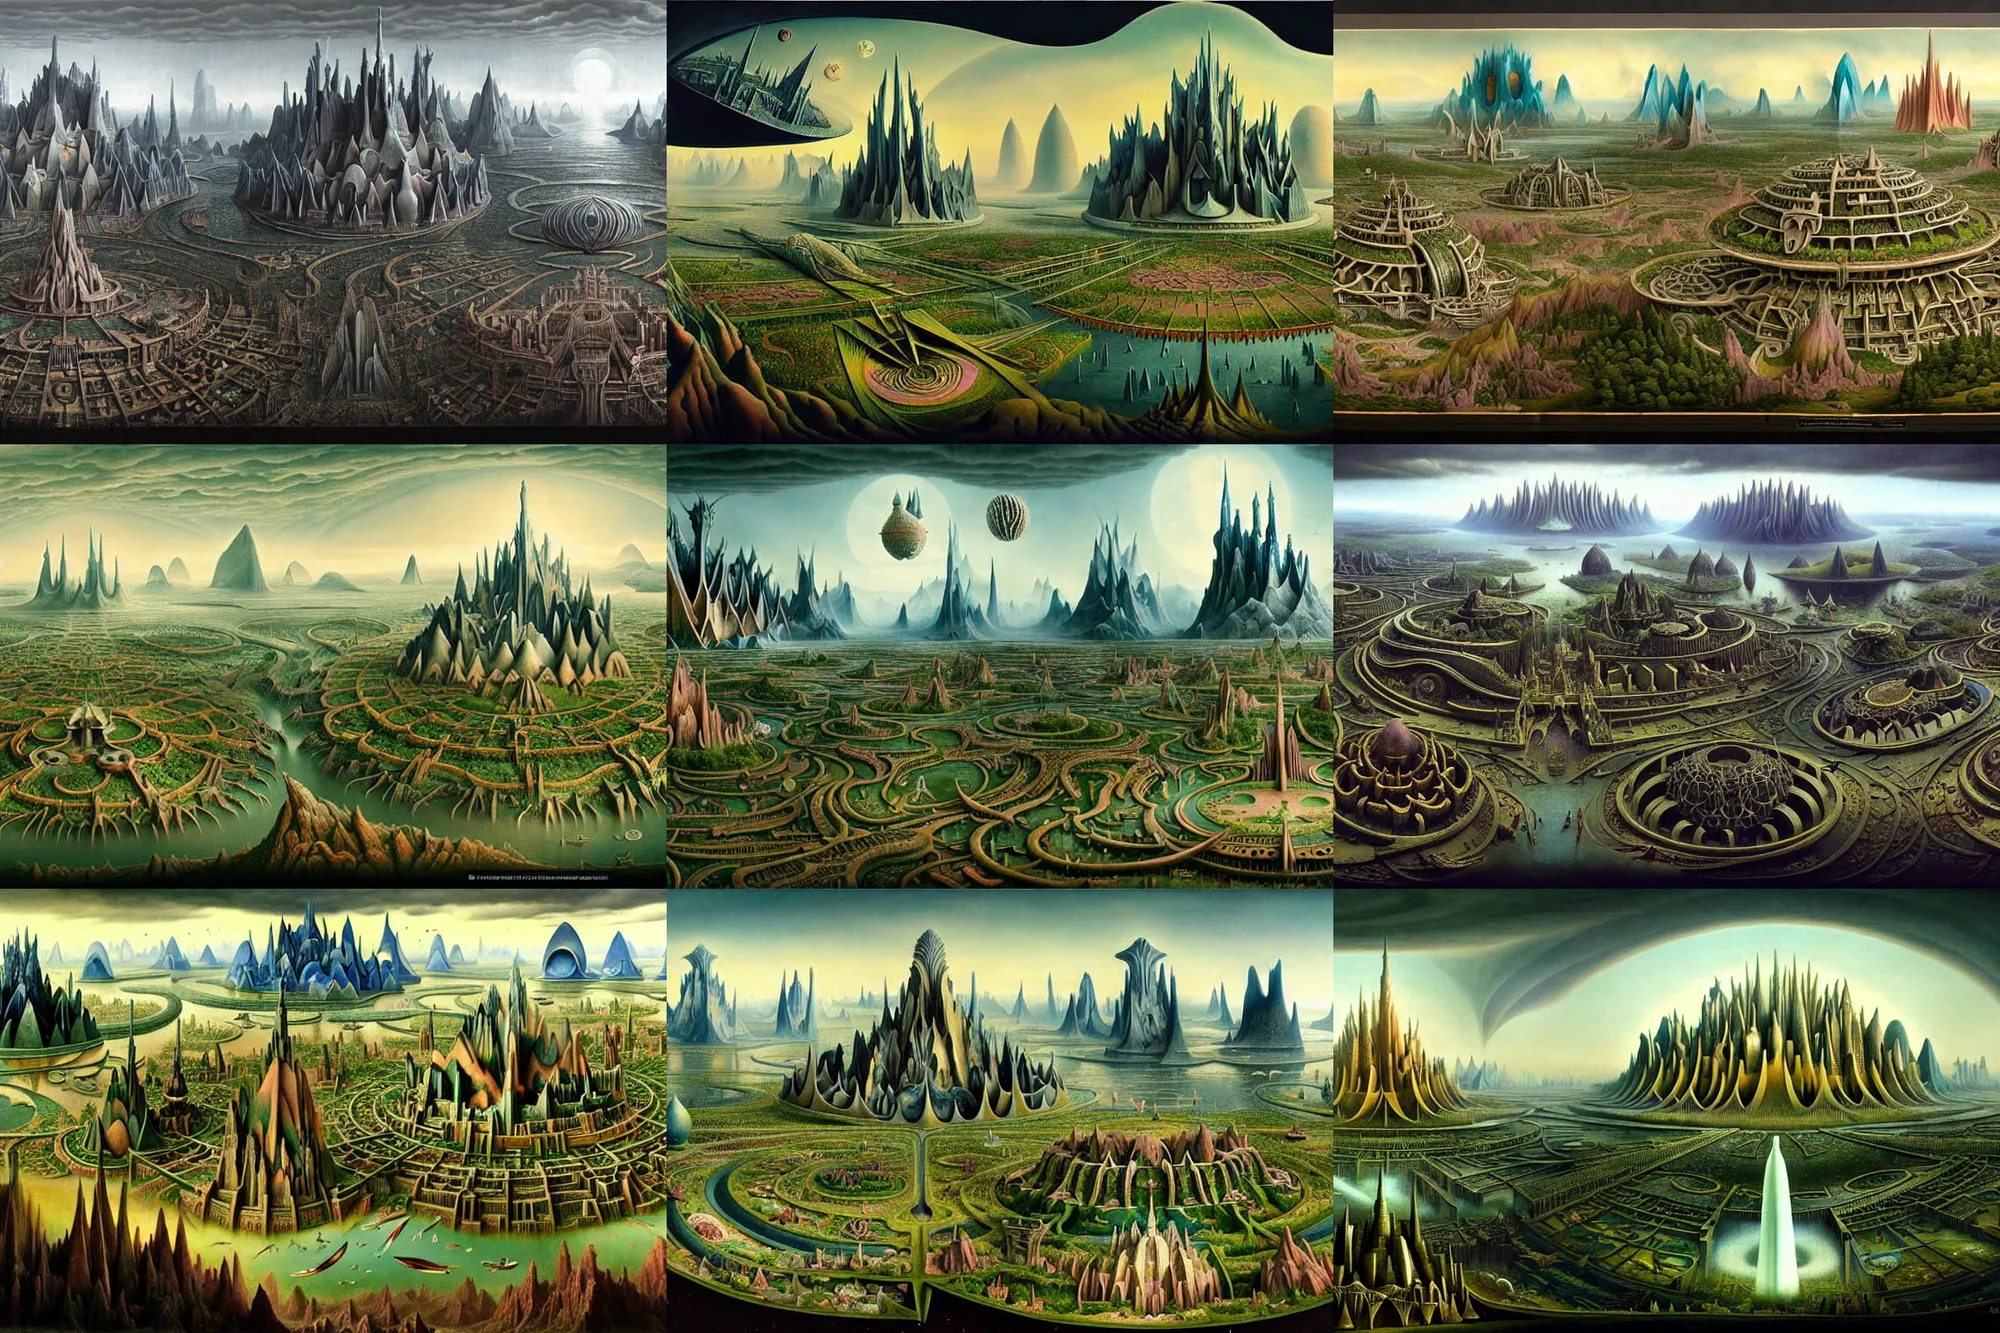 Prompt: a beautiful and insanely detailed matte painting of an advanced sprawling civilization with surreal architecture designed by Heironymous Bosch, mega structures inspired by Heironymous Bosch's Garden of Earthly Delights, a beautiful and insanely detailed matte painting of an advanced sprawling civilization with surreal architecture designed by Heironymous Bosch, mega structures inspired by Heironymous Bosch's Garden of Earthly Delights, a beautiful and insanely detailed matte painting of a magical mythical medieval sprawling civilization with surreal architecture designed by Heironymous Bosch, mega structures inspired by Heironymous Bosch's Garden of Earthly Delights, creatures of the air and sea inspired by Heironymous Bosch's Garden of Earthly Delights, ships in the harbor inspired by Heironymous Bosch's Garden of Earthly Delights, vast surreal landscape and horizon by Jim Burns and Tyler Edlin, vast surreal landscape and horizon by Jim Burns and Tyler Edlin, rich pastel color palette, masterpiece!!, grand!, imaginative!!!, whimsical!!, epic scale, intricate details, sense of awe, elite, fantasy realism, complex layered composition!!